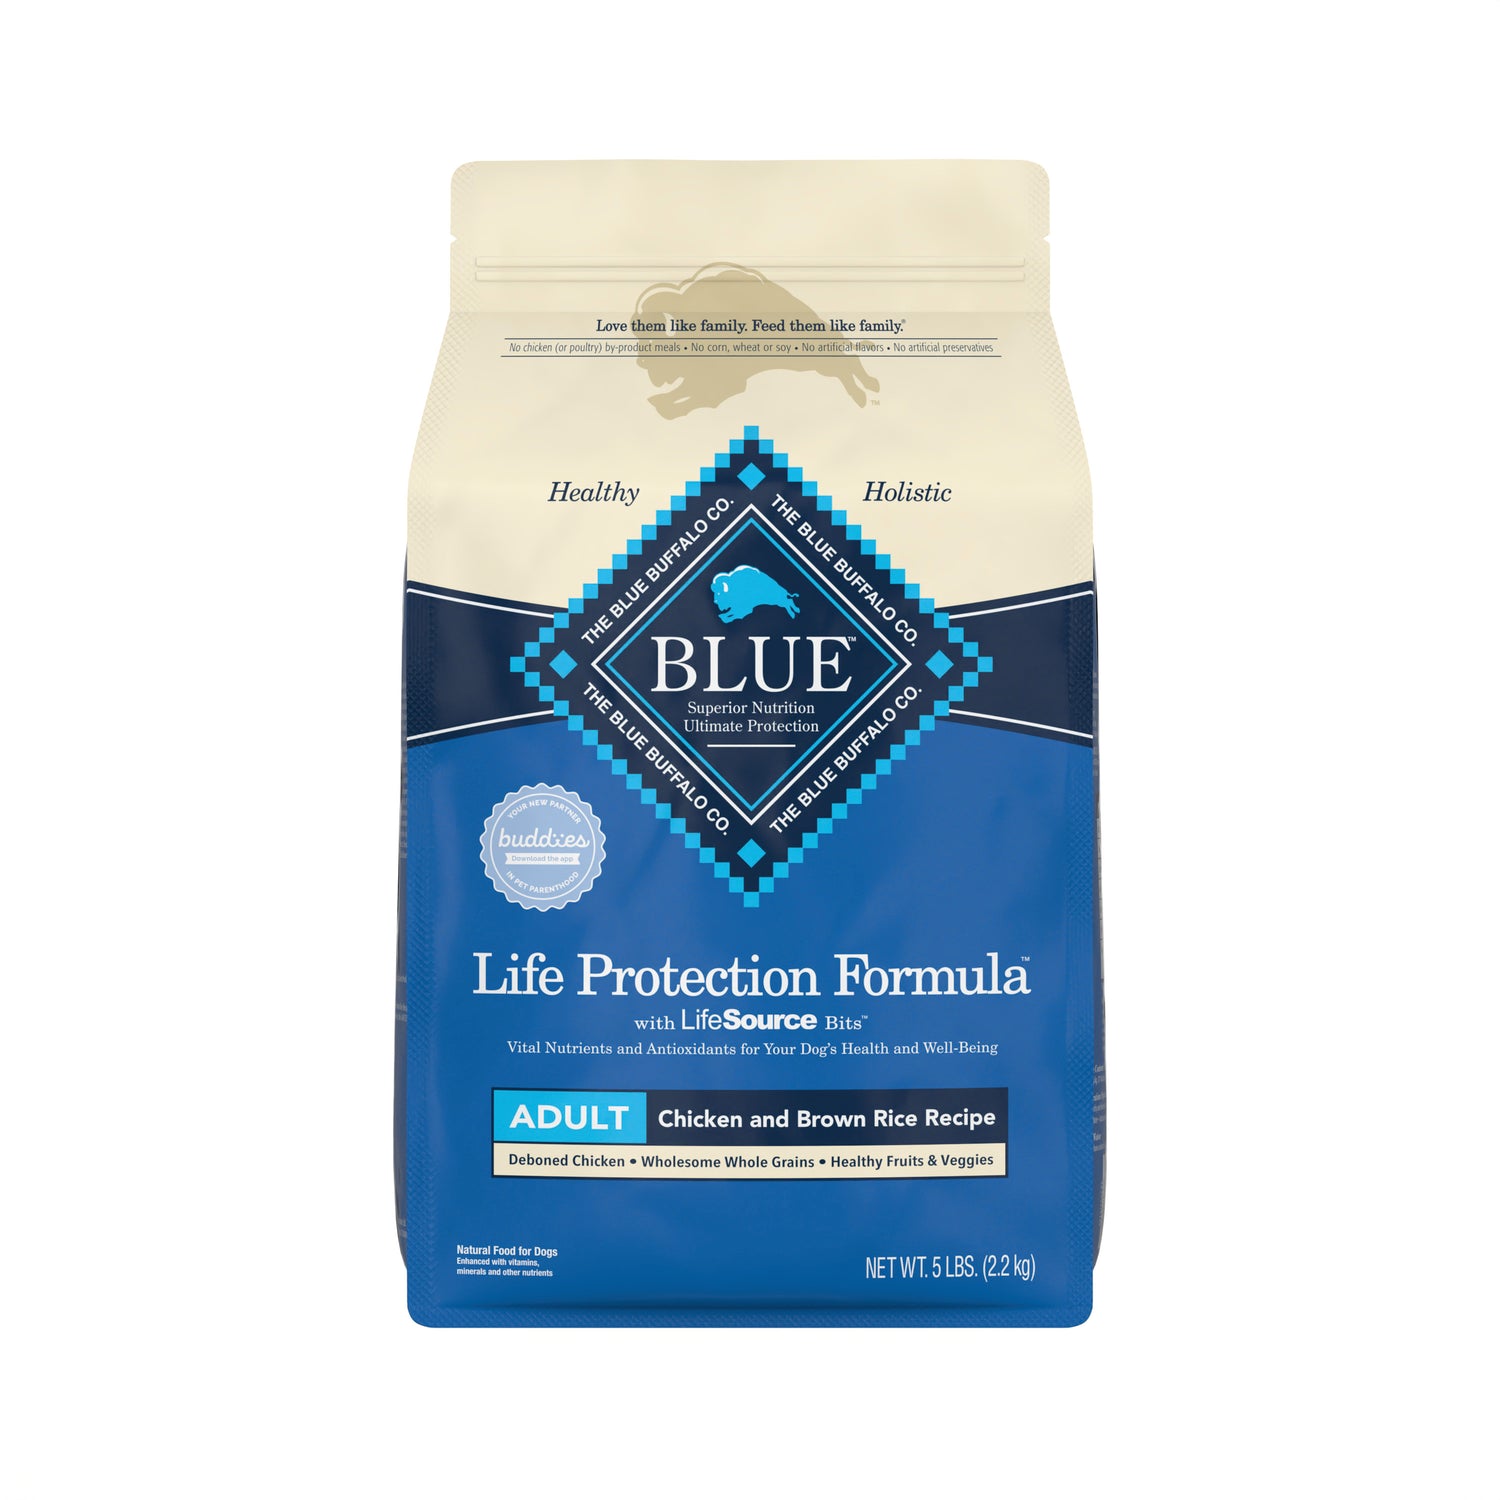 Blue Buffalo Life Protection Formula Chicken and Brown Rice Dry Dog Food for Adult Dogs, Whole Grain, 5 Lb. Bag